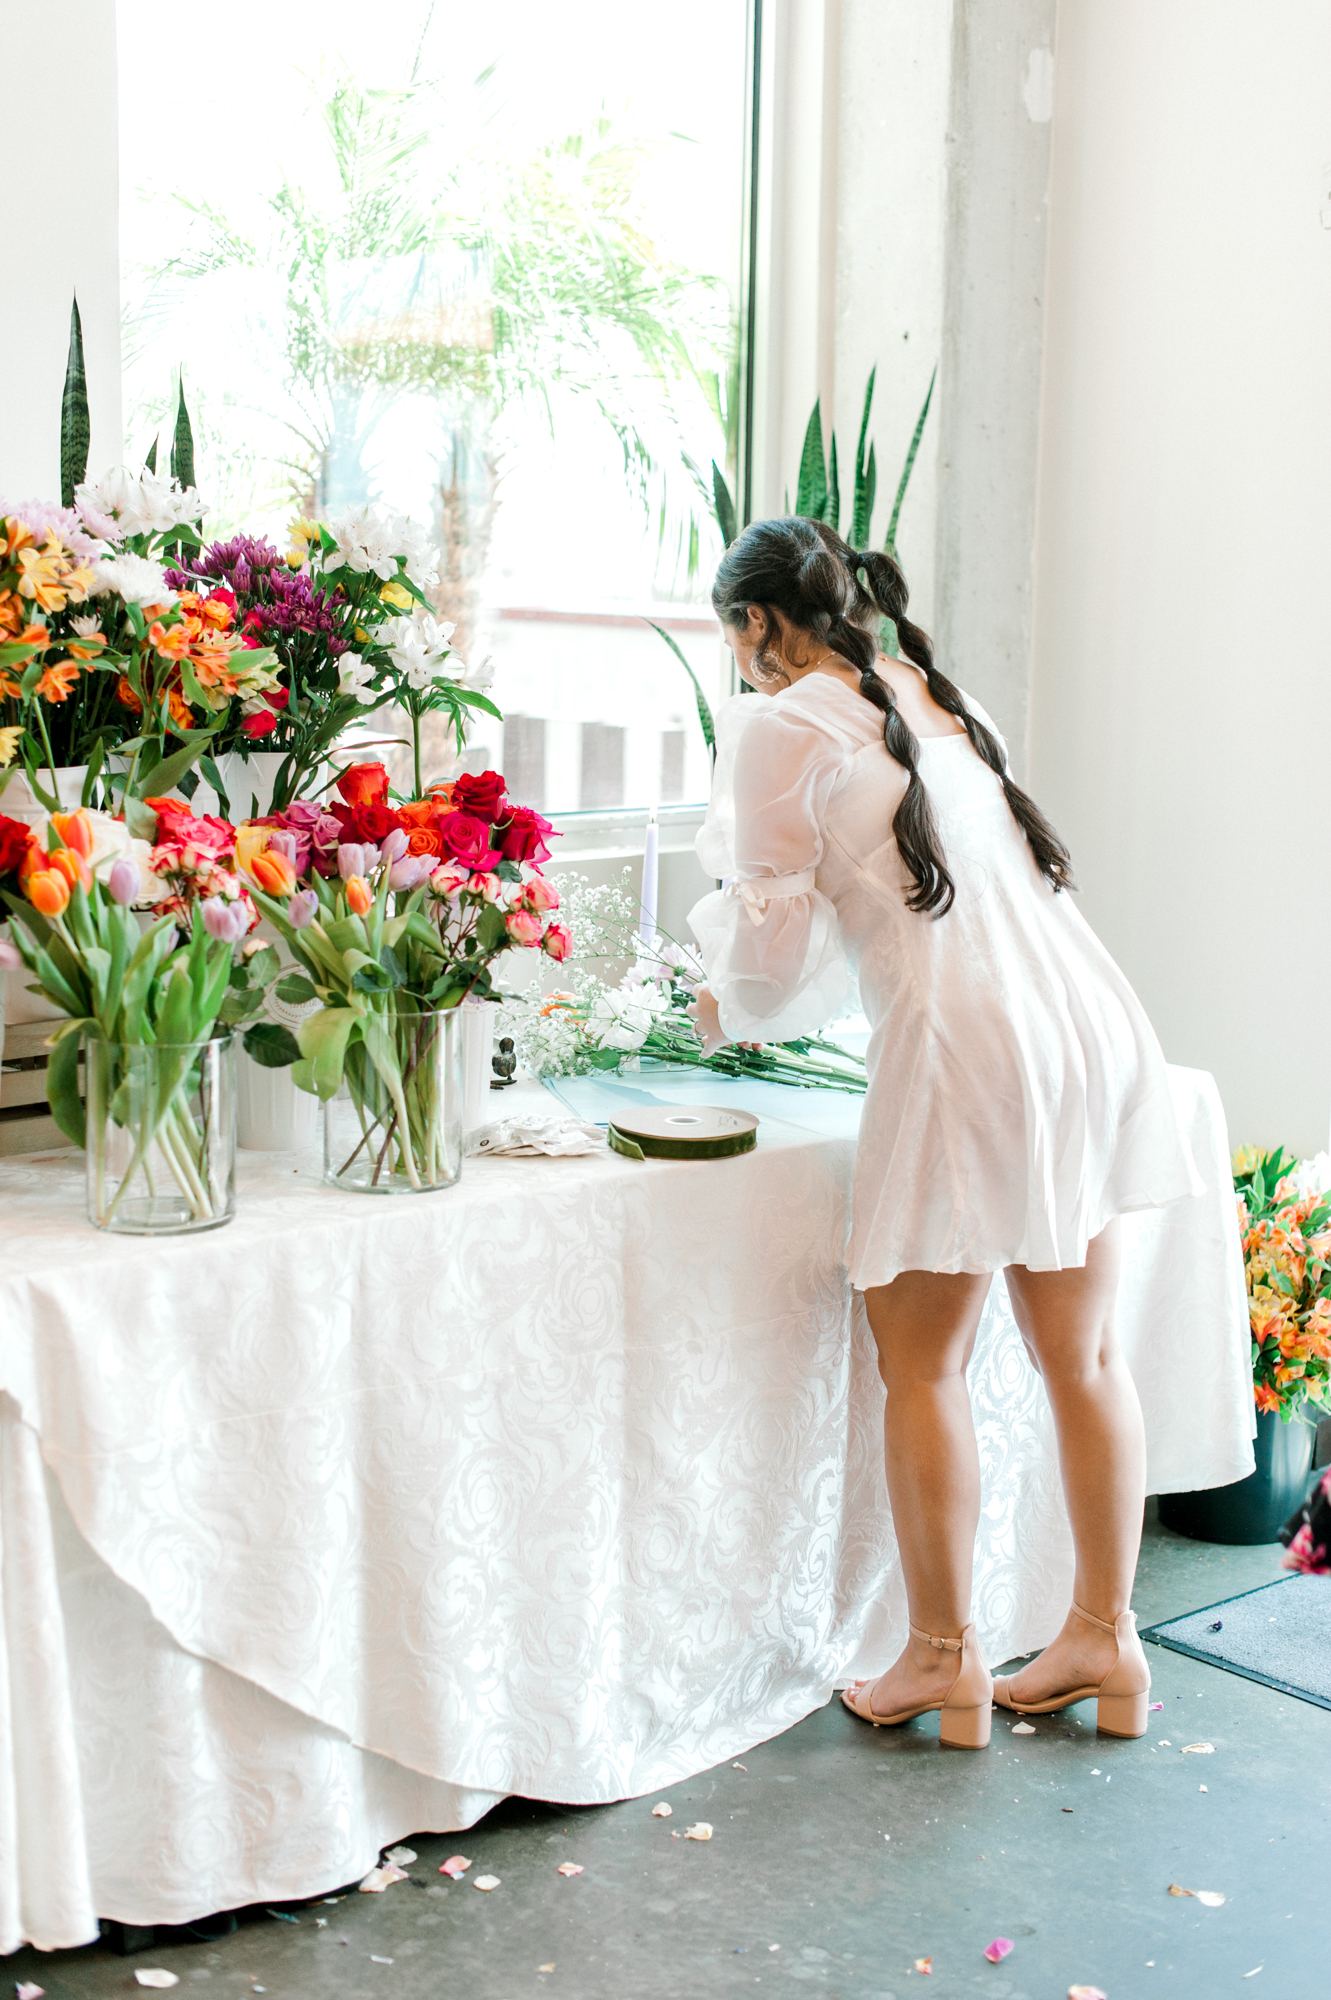 The bride making a flower bouquet at her flower bar in the private event room at The Landing Rooftop.